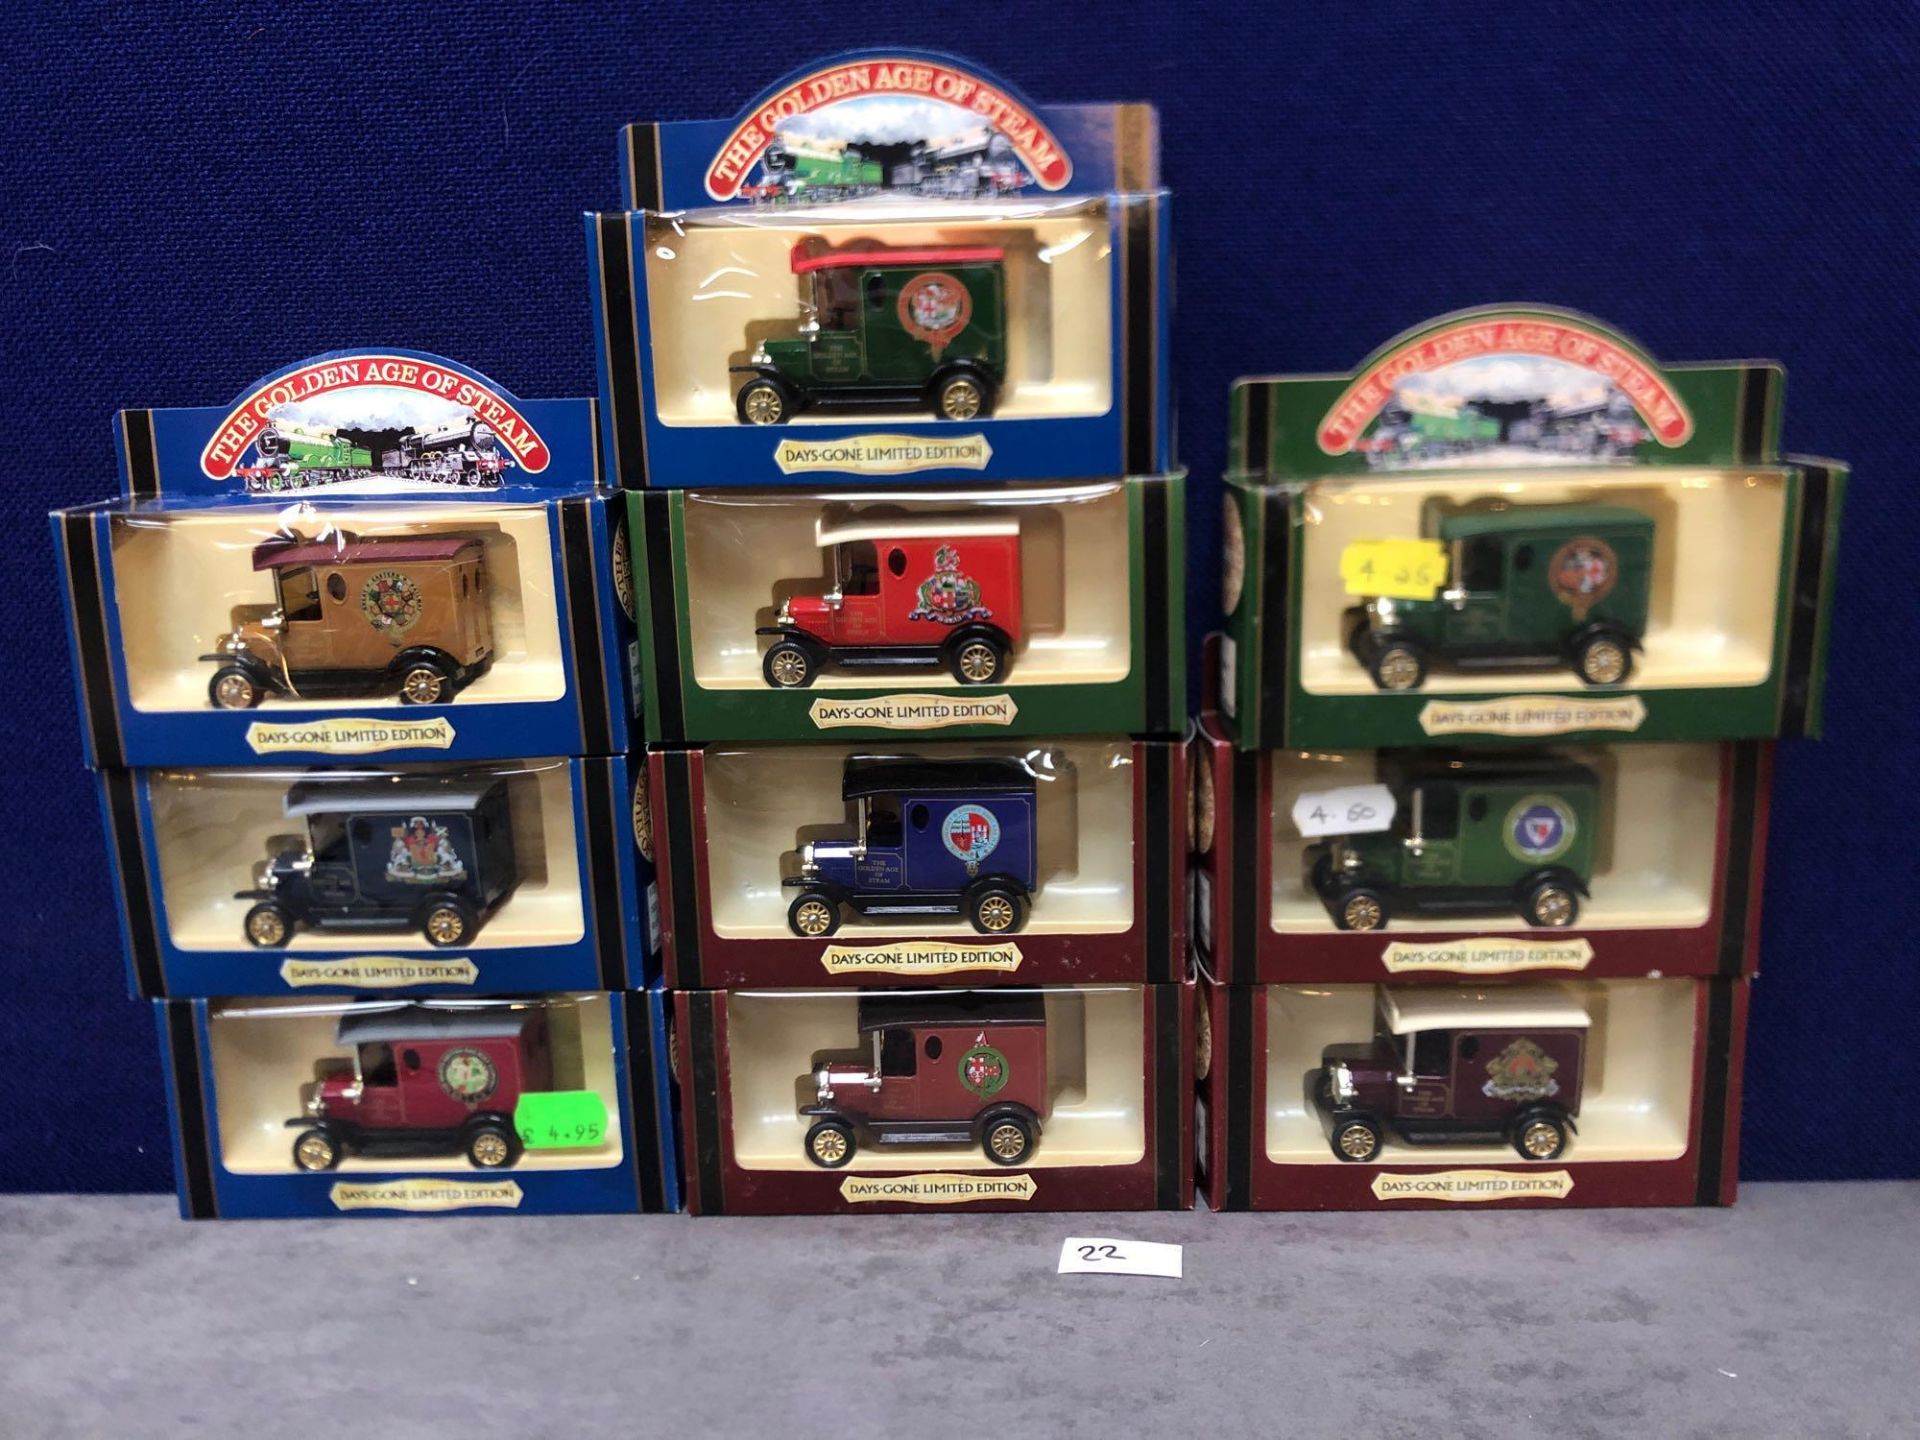 10x Diecast The Days Gone Limited Edition The Golden Age Of Steam Vehicles In Boxes